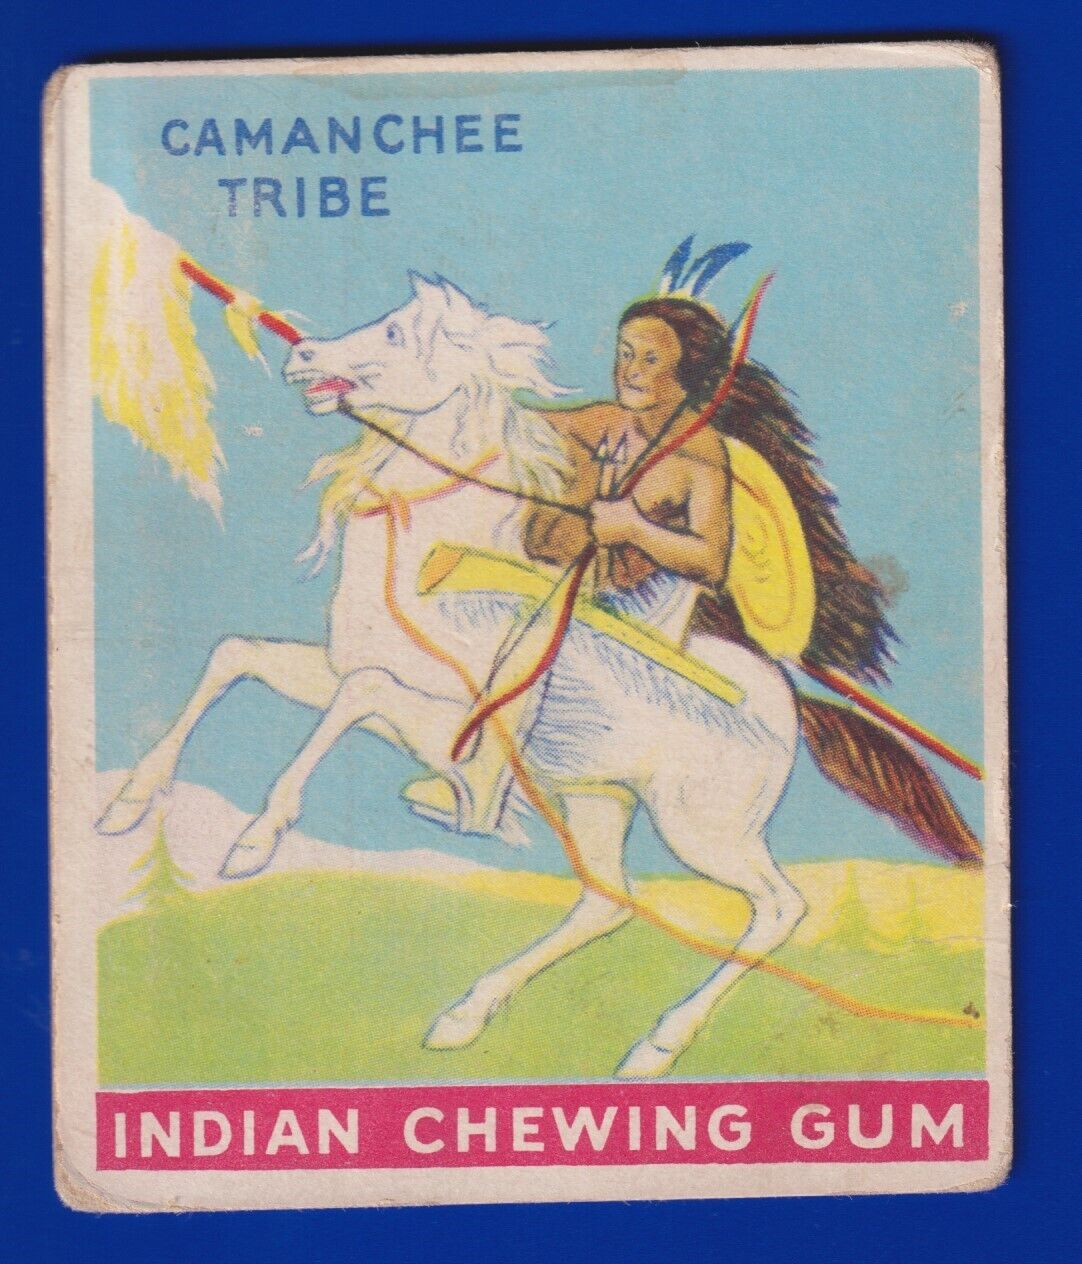  WARRIOR OF THE CAMANCHEE TRIBE 1933 R73 GOUDEY INDIAN GUM series of 48 #19 GOOD